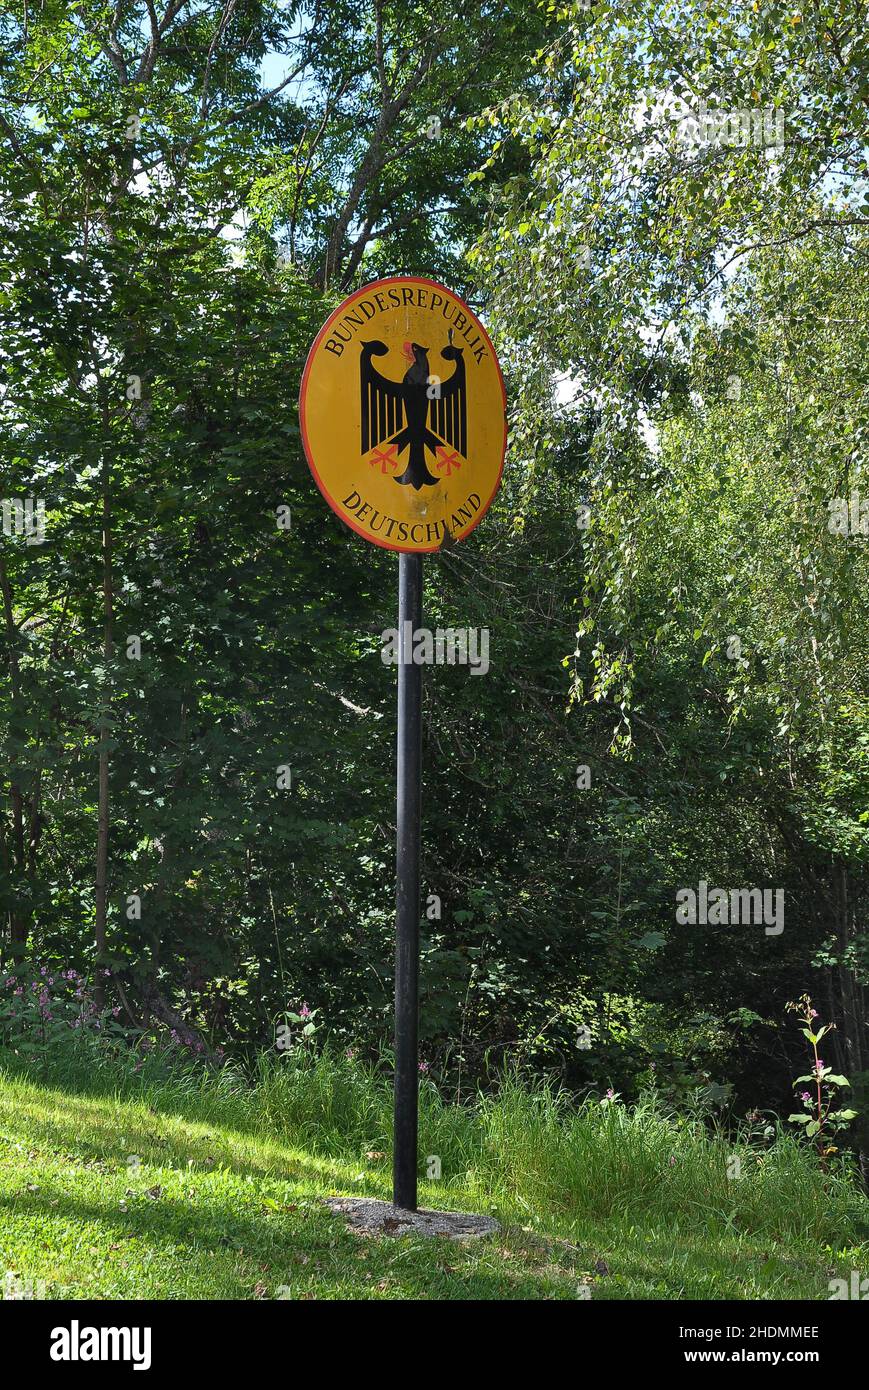 federal republic of germany, border sign, federal republic of germanies, border signs Stock Photo